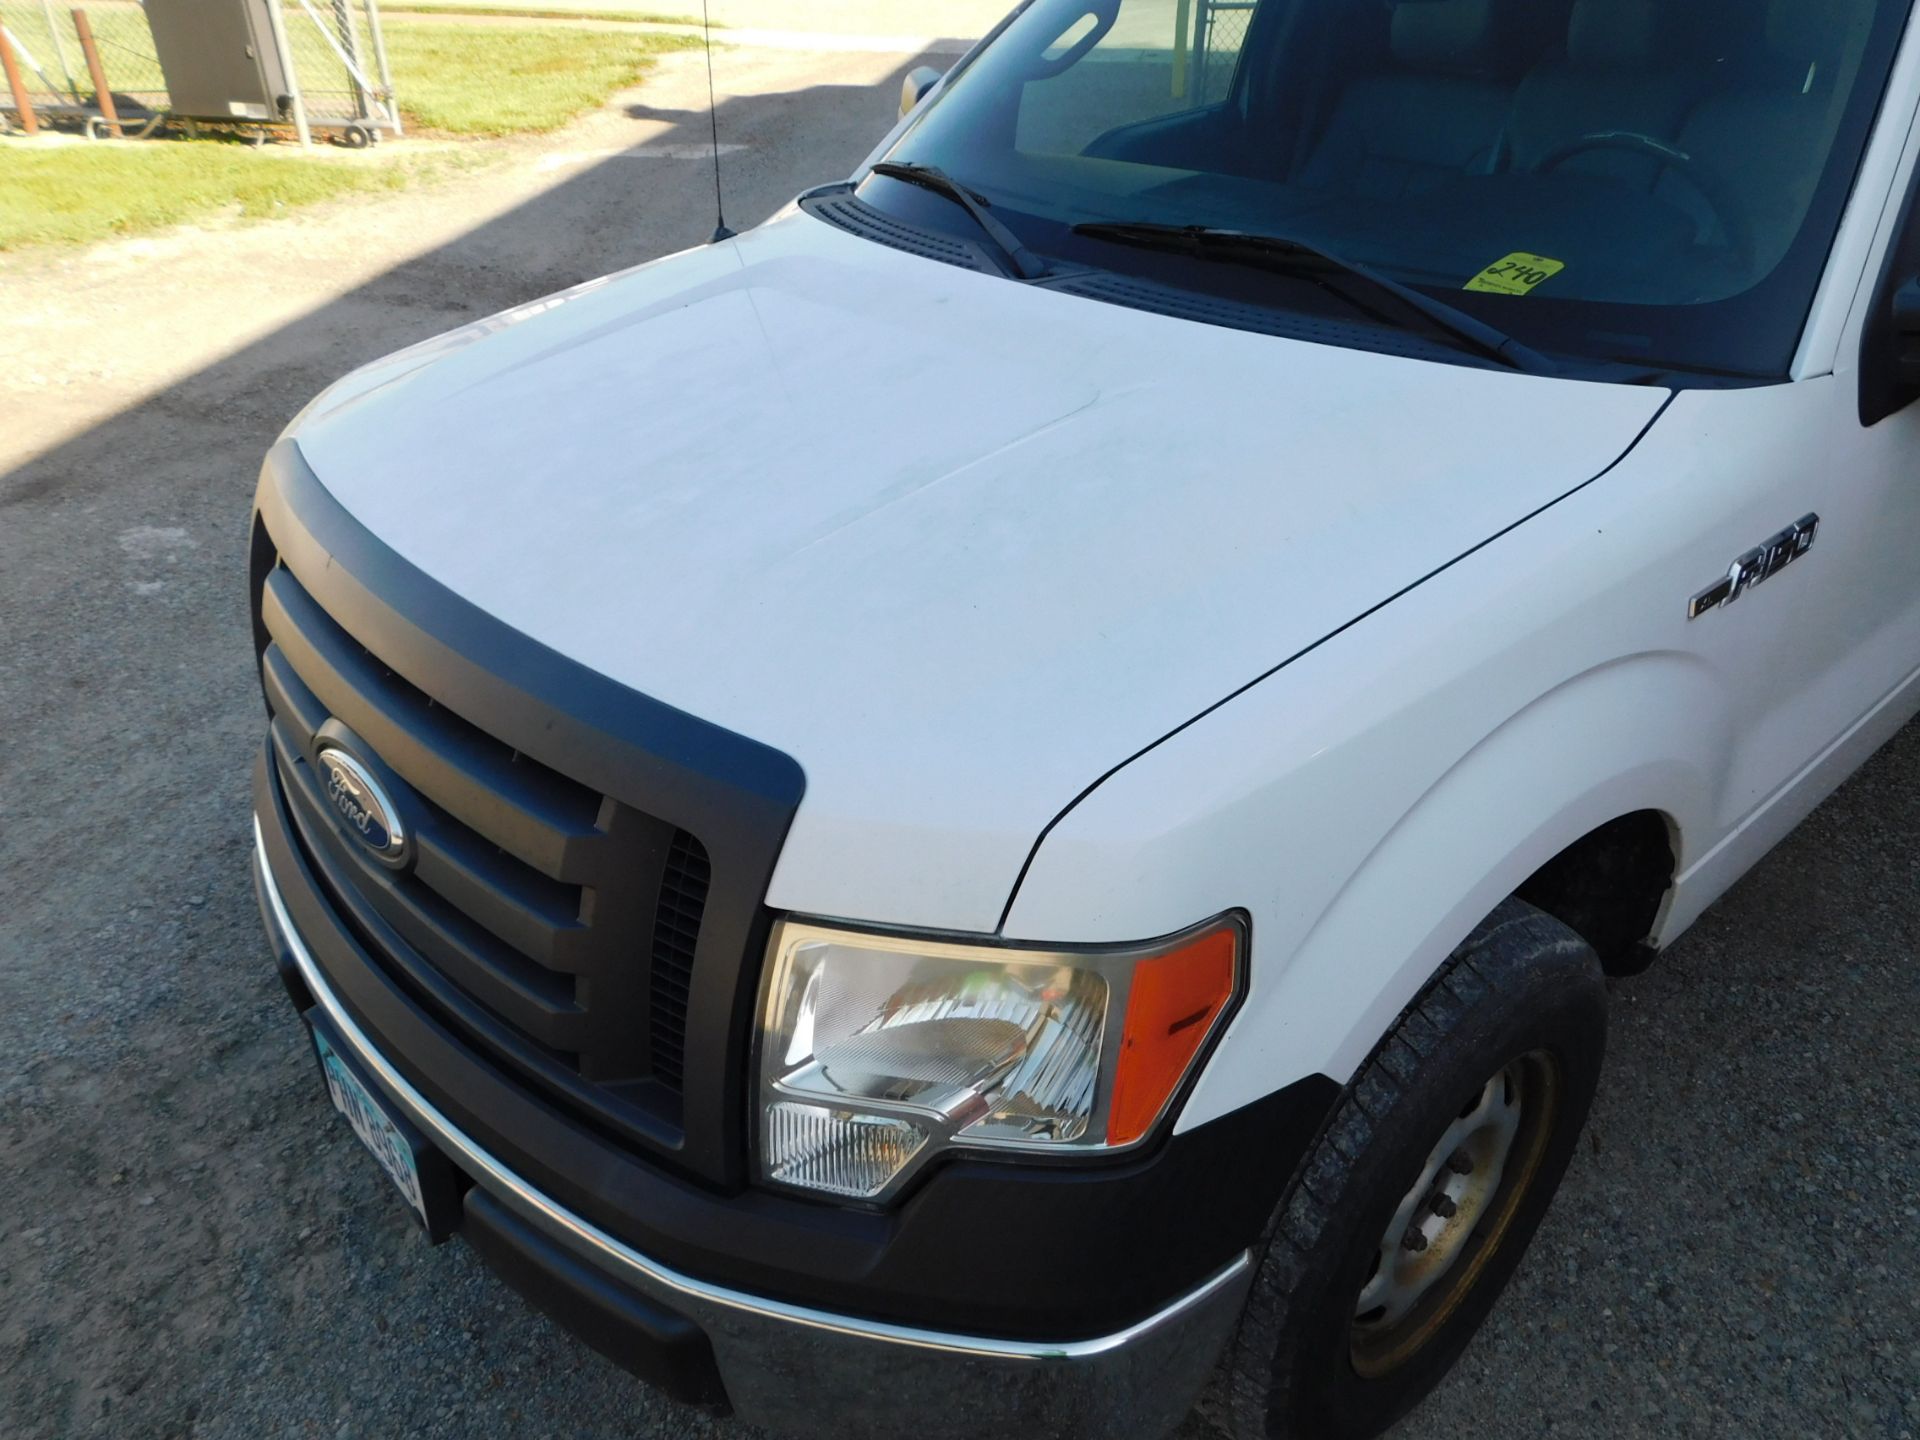 2011 Ford Pick up F-150XL vin 1FTMF1CM3CKD12942, Automatic Transmission, PW, Pl, 8'Bed w/Cap 146,289 - Image 22 of 46